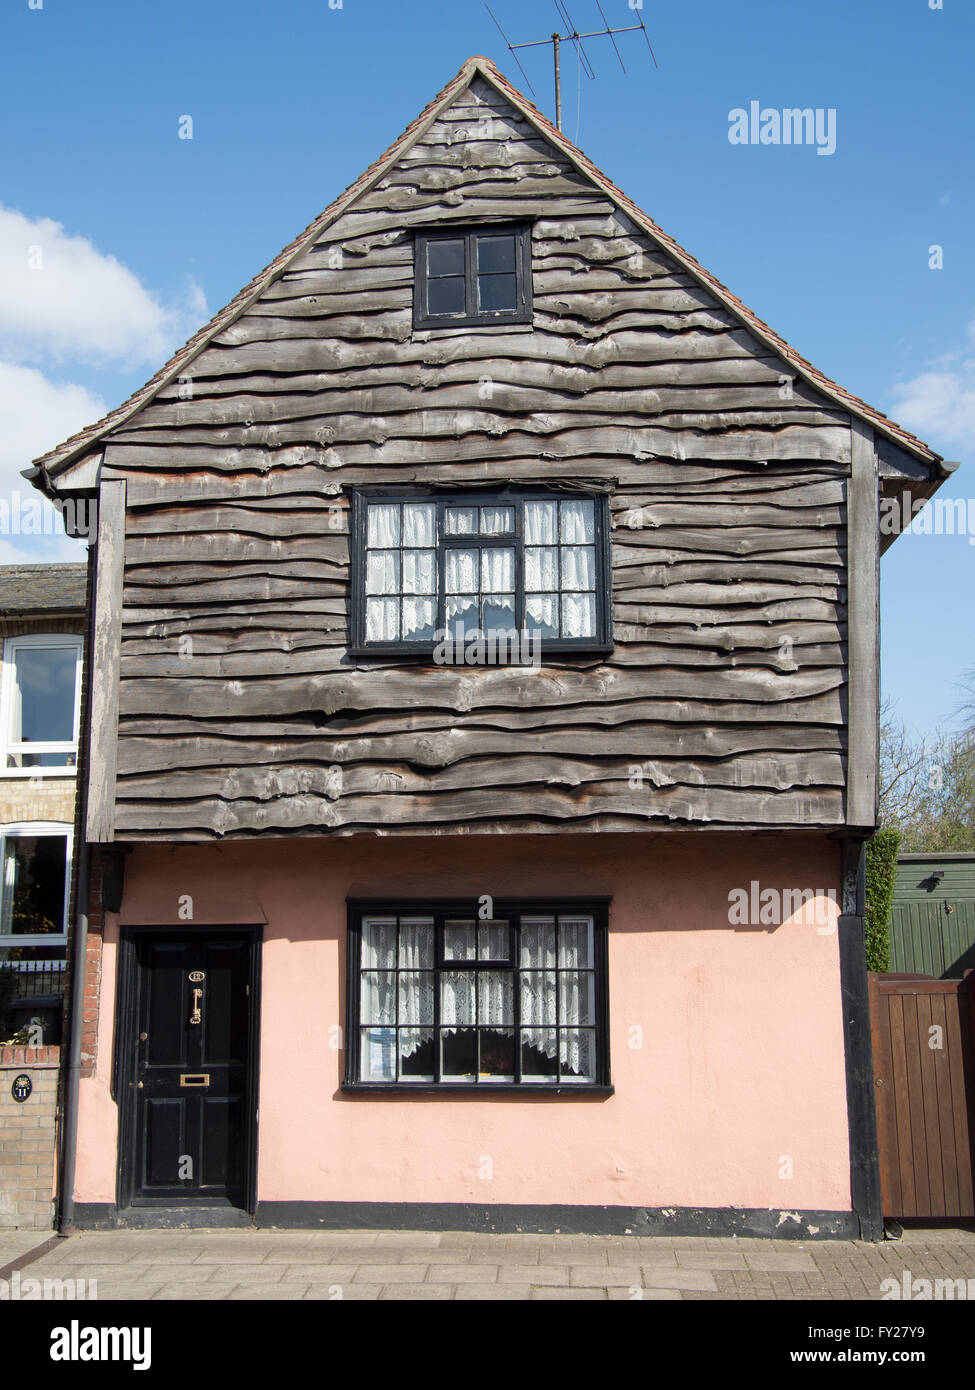 An old timber-fronted detached house in Sudbury, England. Stock Photo